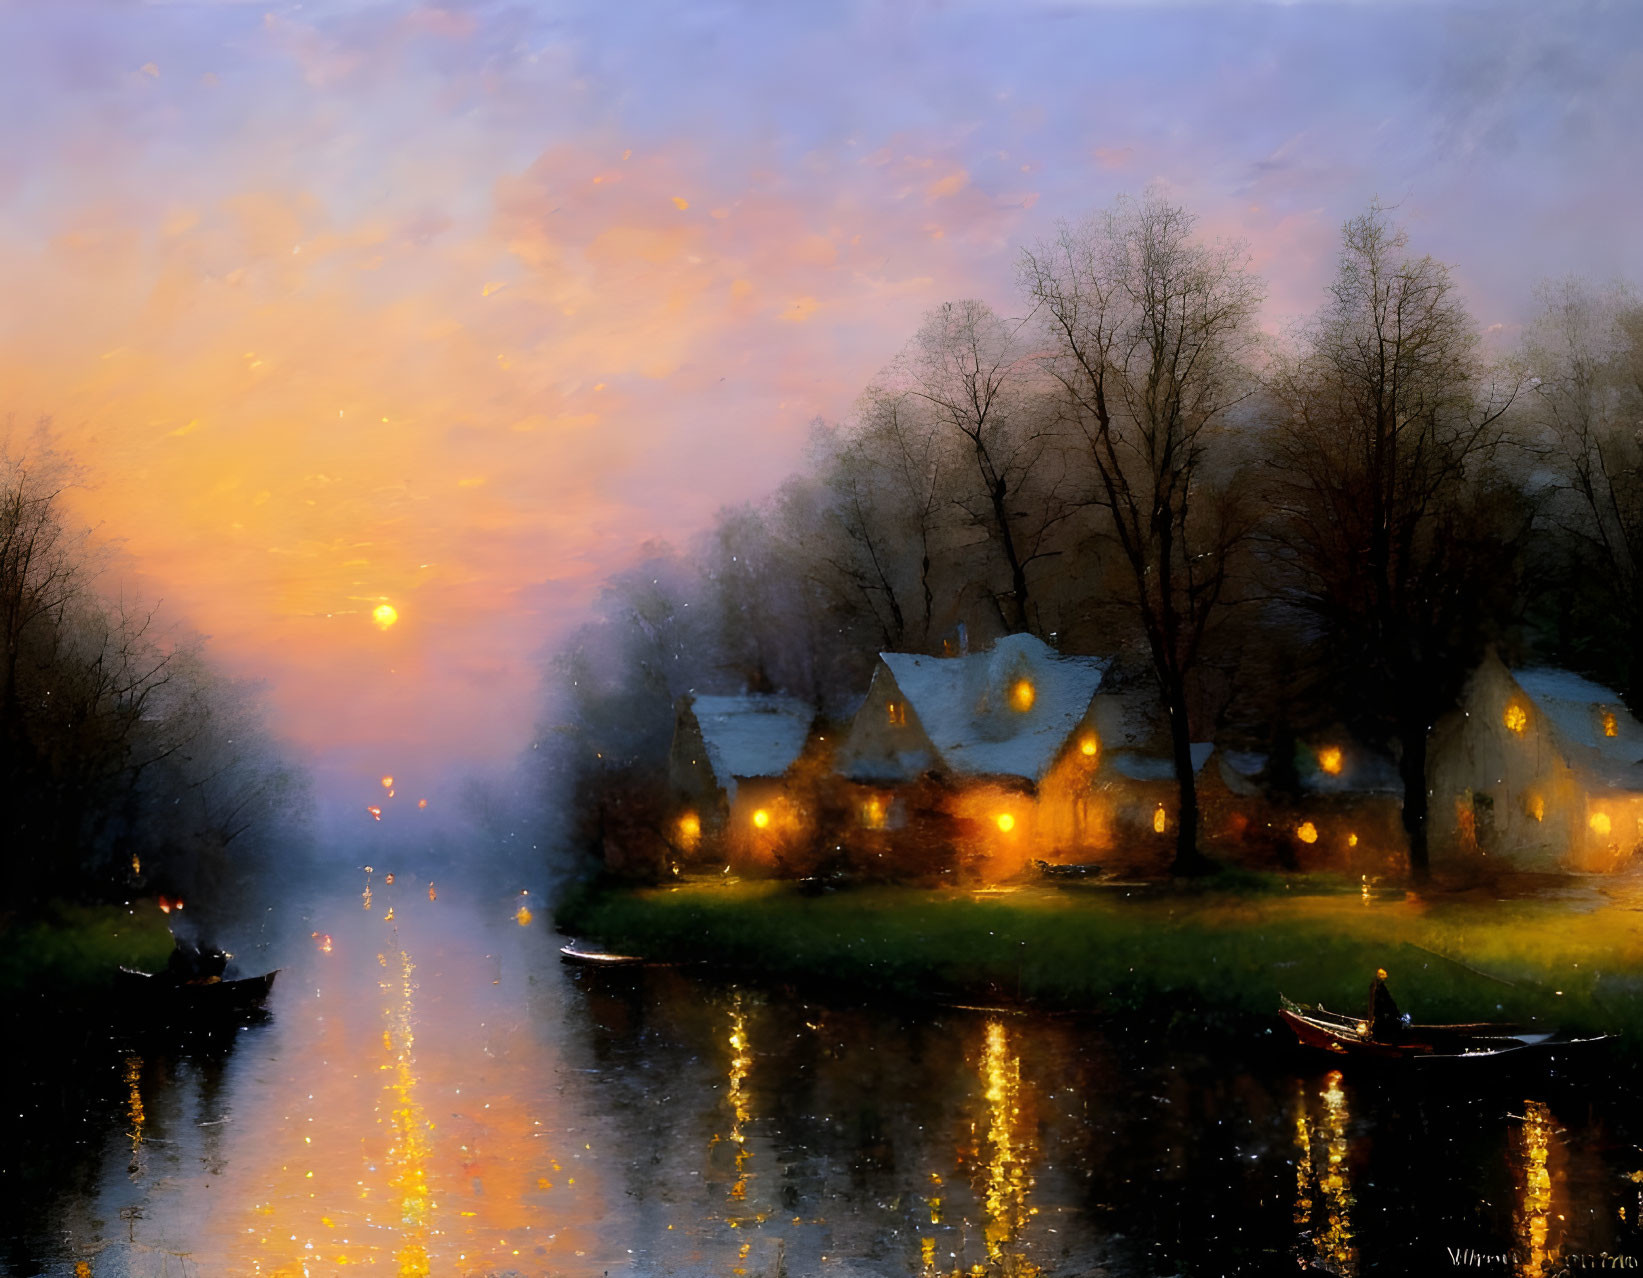 Twilight river scene with glowing cottages and boats at sunset